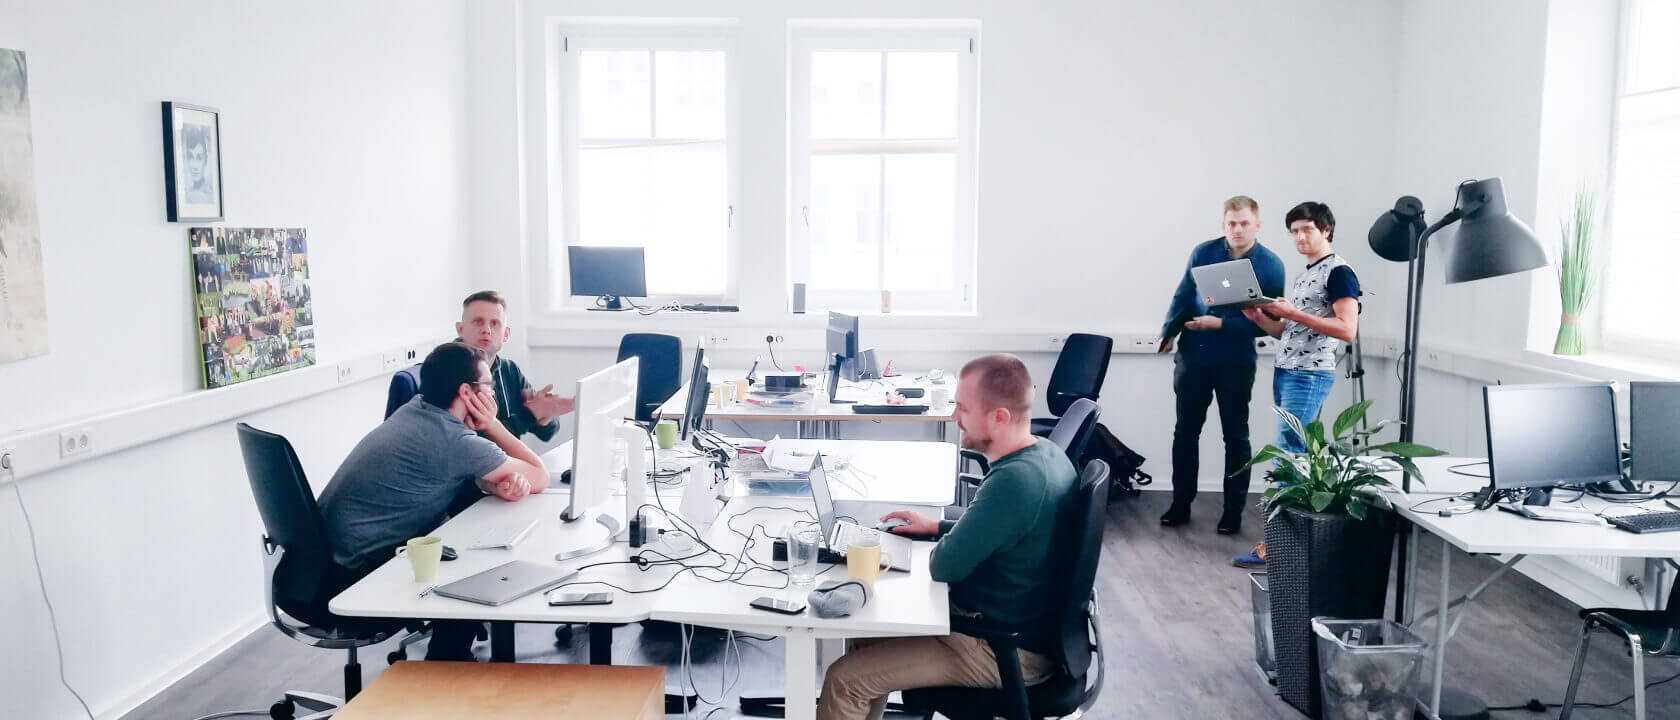 impression of the rentware team in the office at work